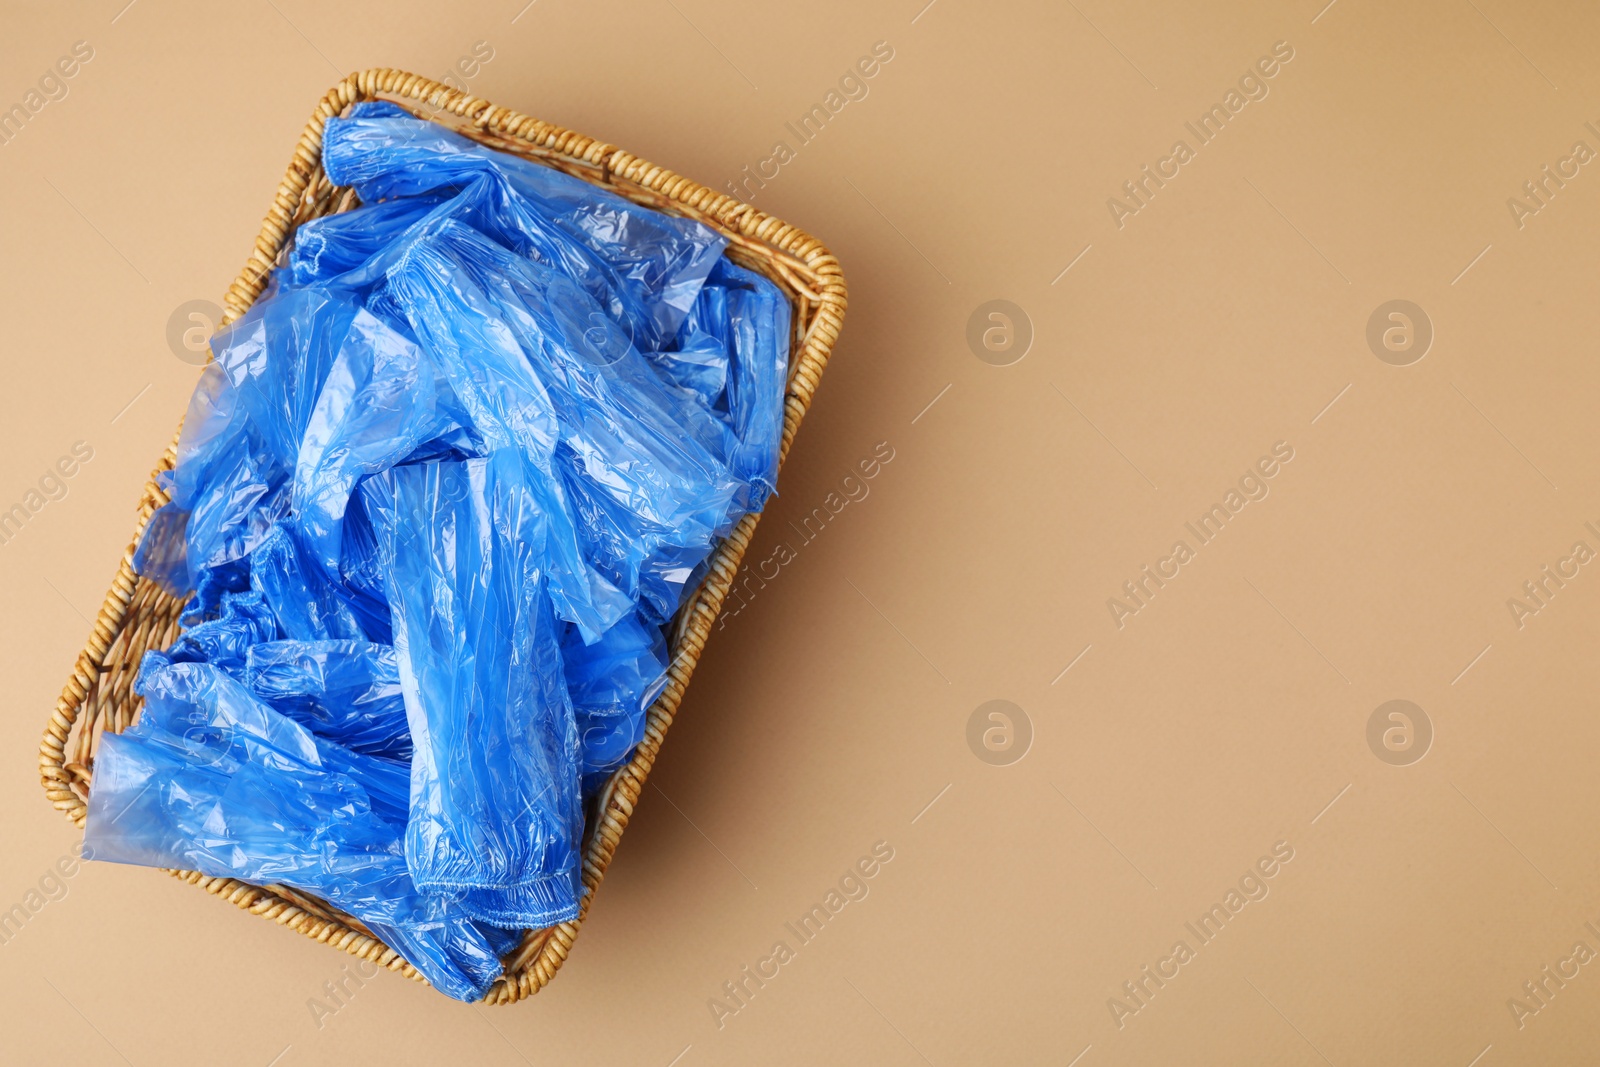 Photo of Blue medical shoe covers in wicker basket on beige background, top view. Space for text